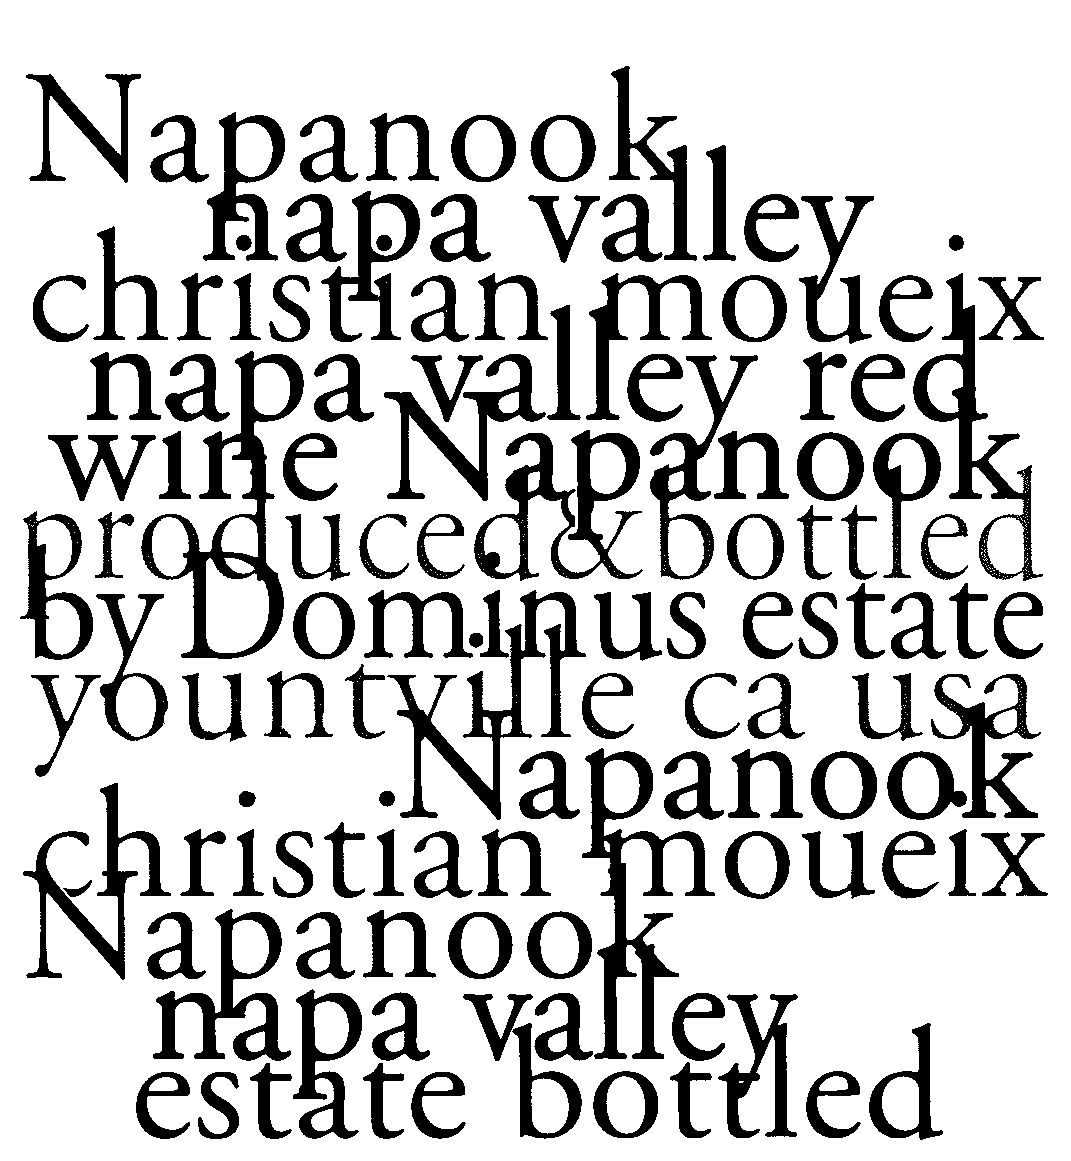  NAPANOOK NAPA VALLEY CHRISTIAN MOUEIX NAPA VALLEY RED WINE NAPANOOK PRODUCED &amp; BOTTLED BY DOMINUS ESTATE YOUNTVILLE CA USA N